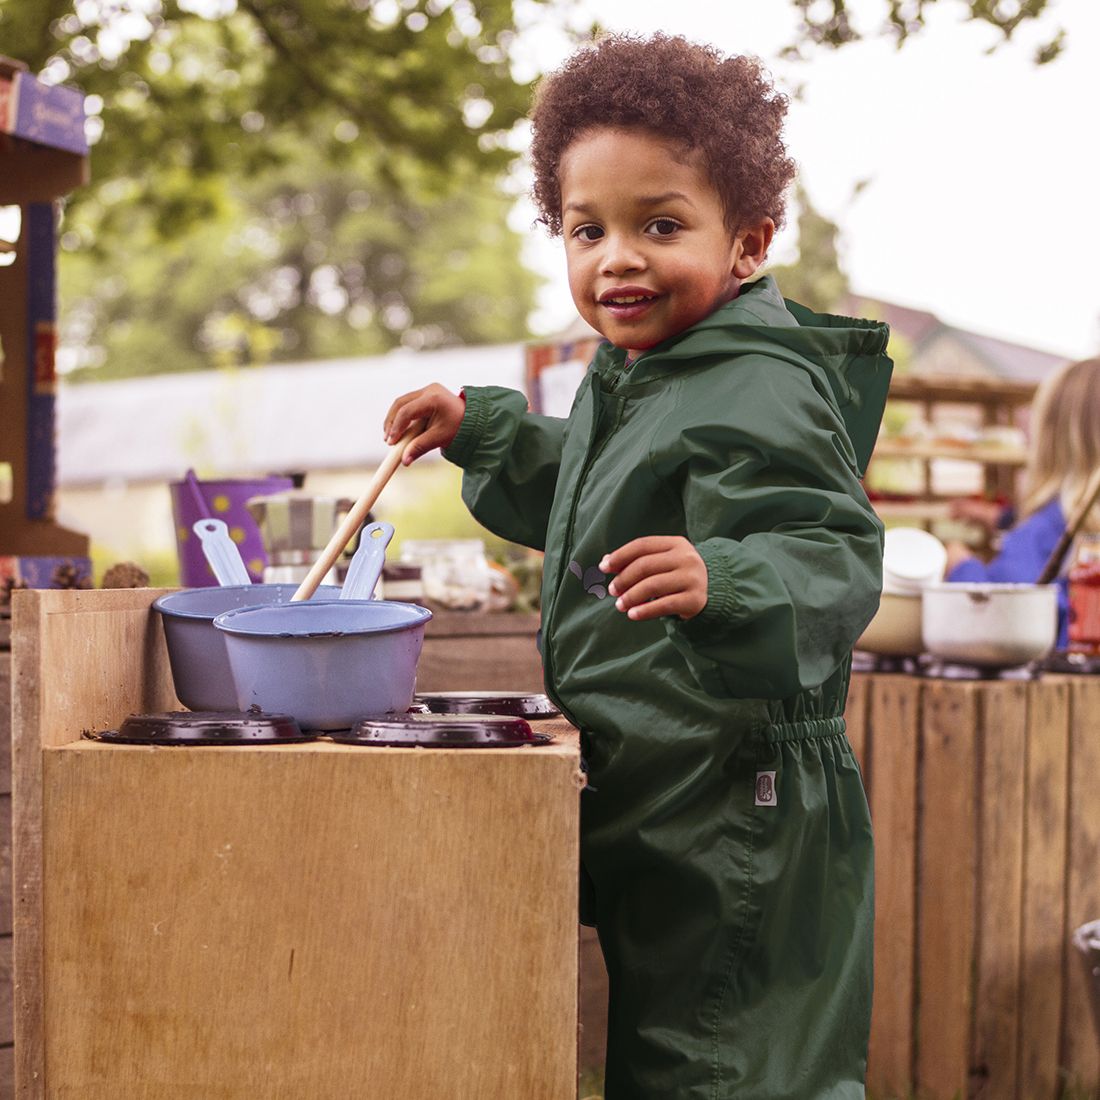 Muddy Puddles Recycled Originals All-in-One Puddle Suit